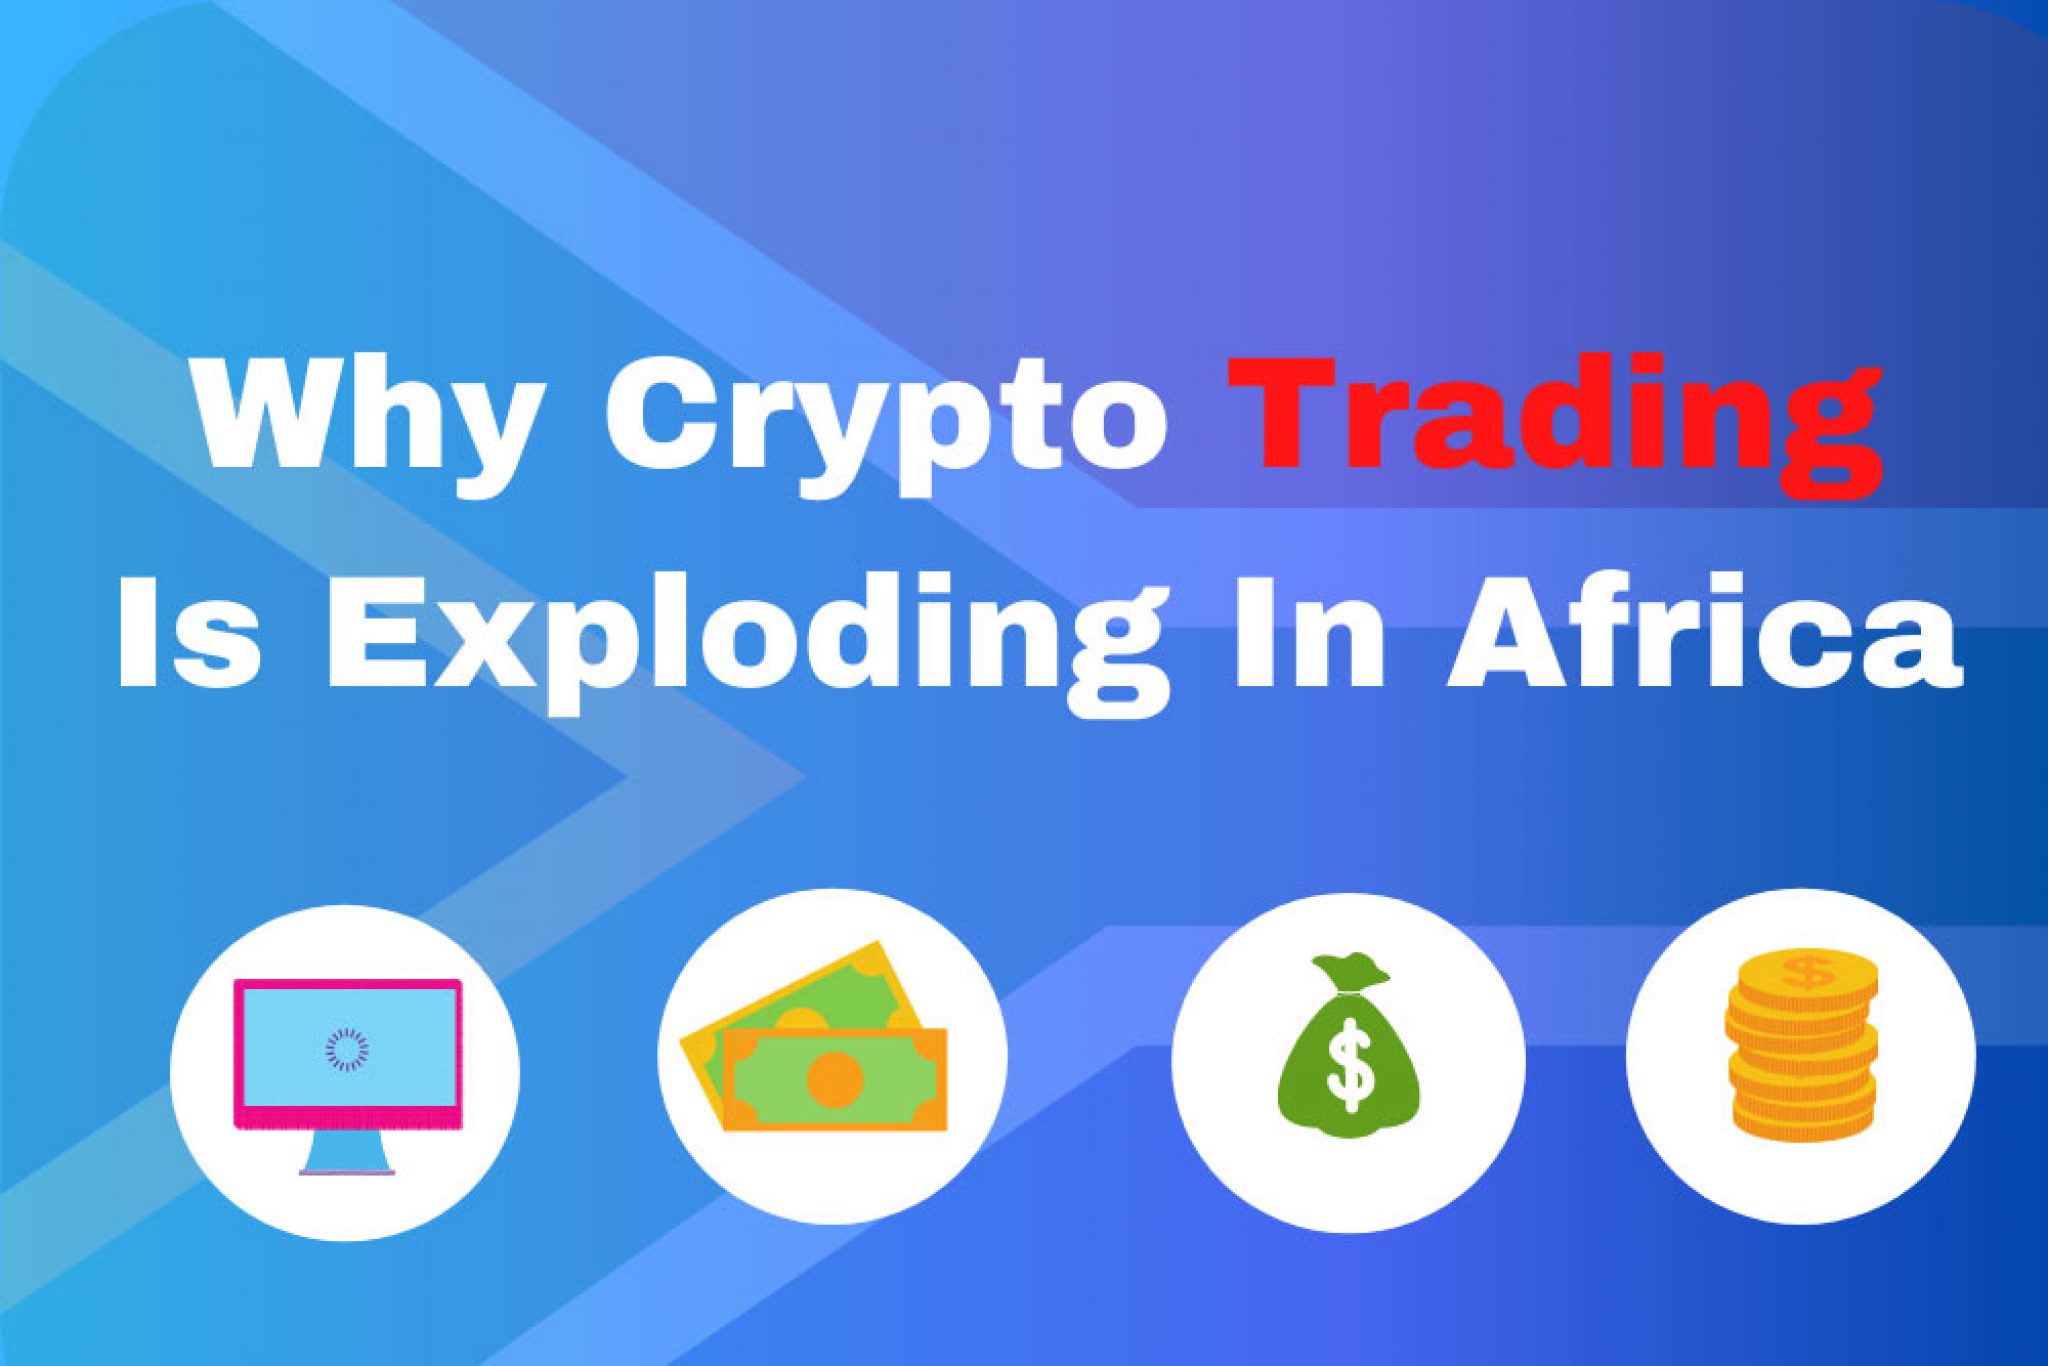 5 Reasons Causing Explosion of Crypto Trading In Africa